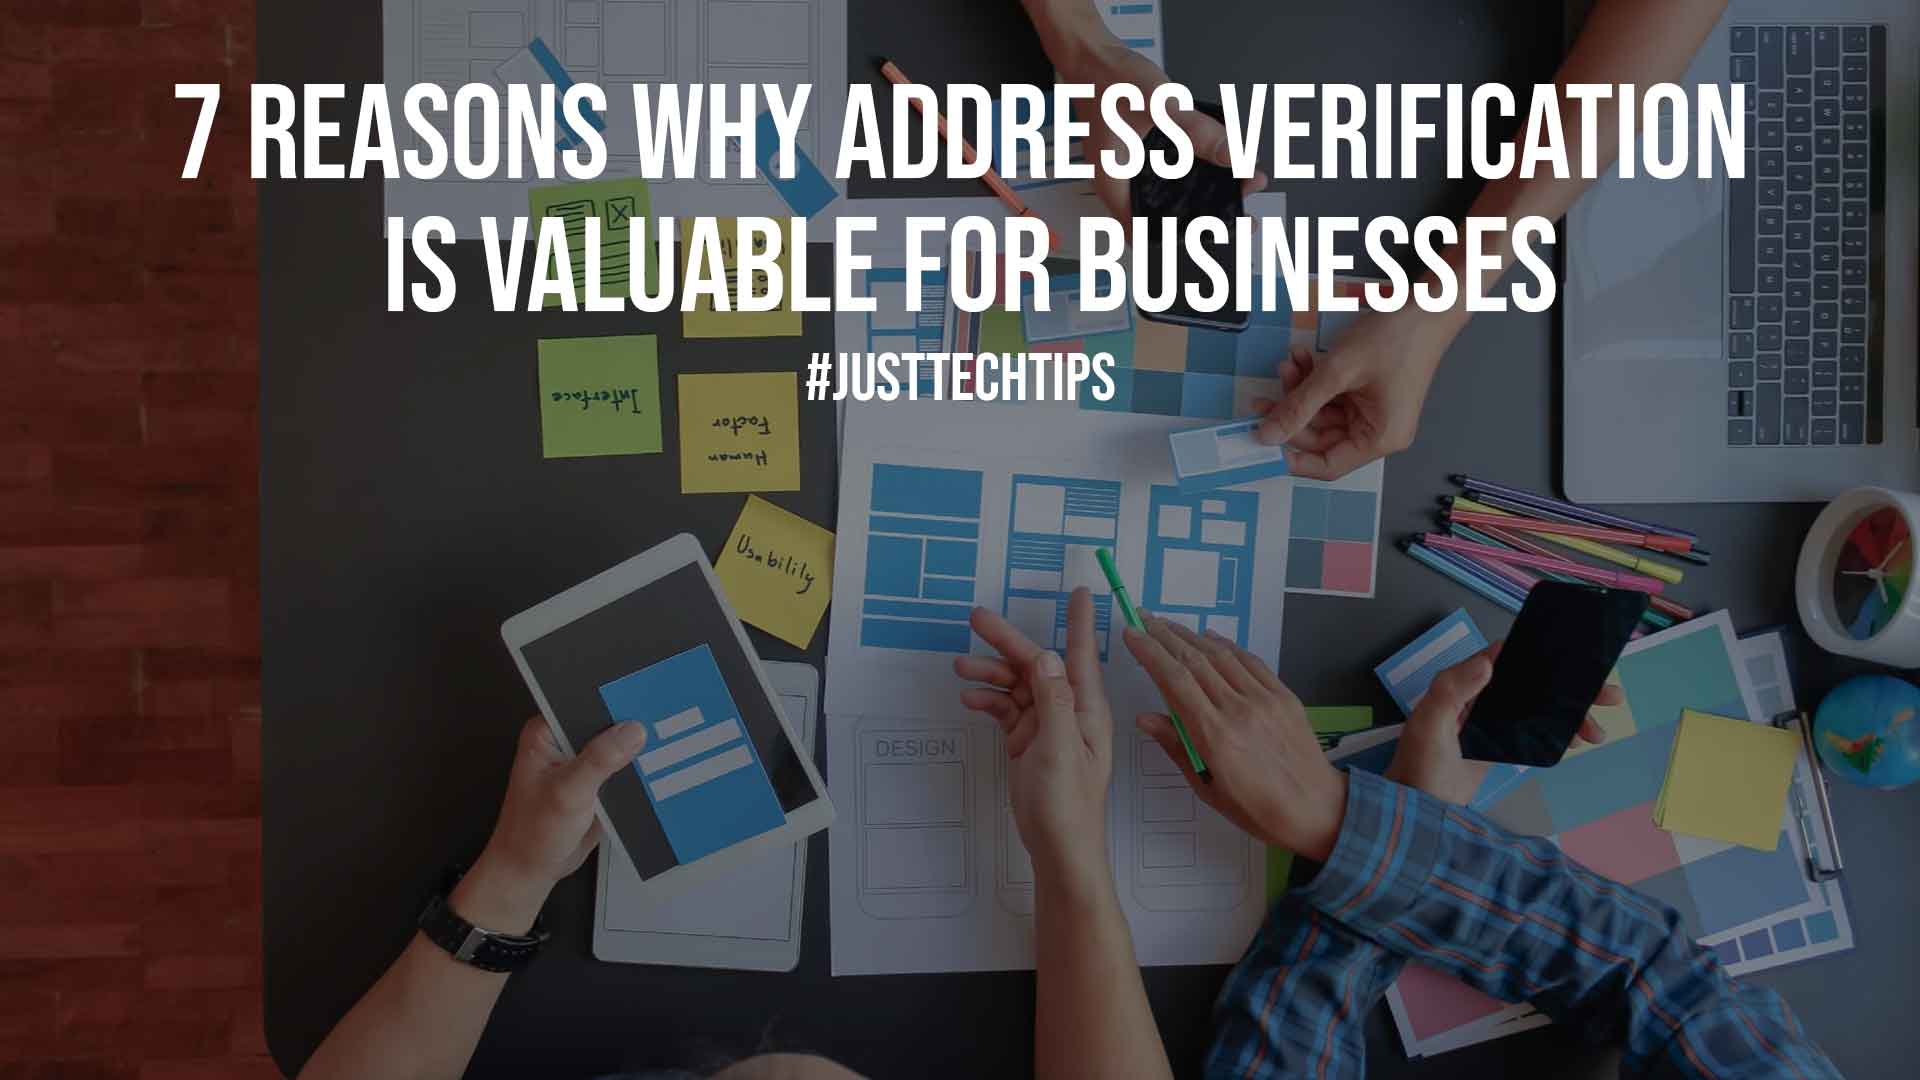 7 Reasons Why Address Verification is Valuable for Businesses